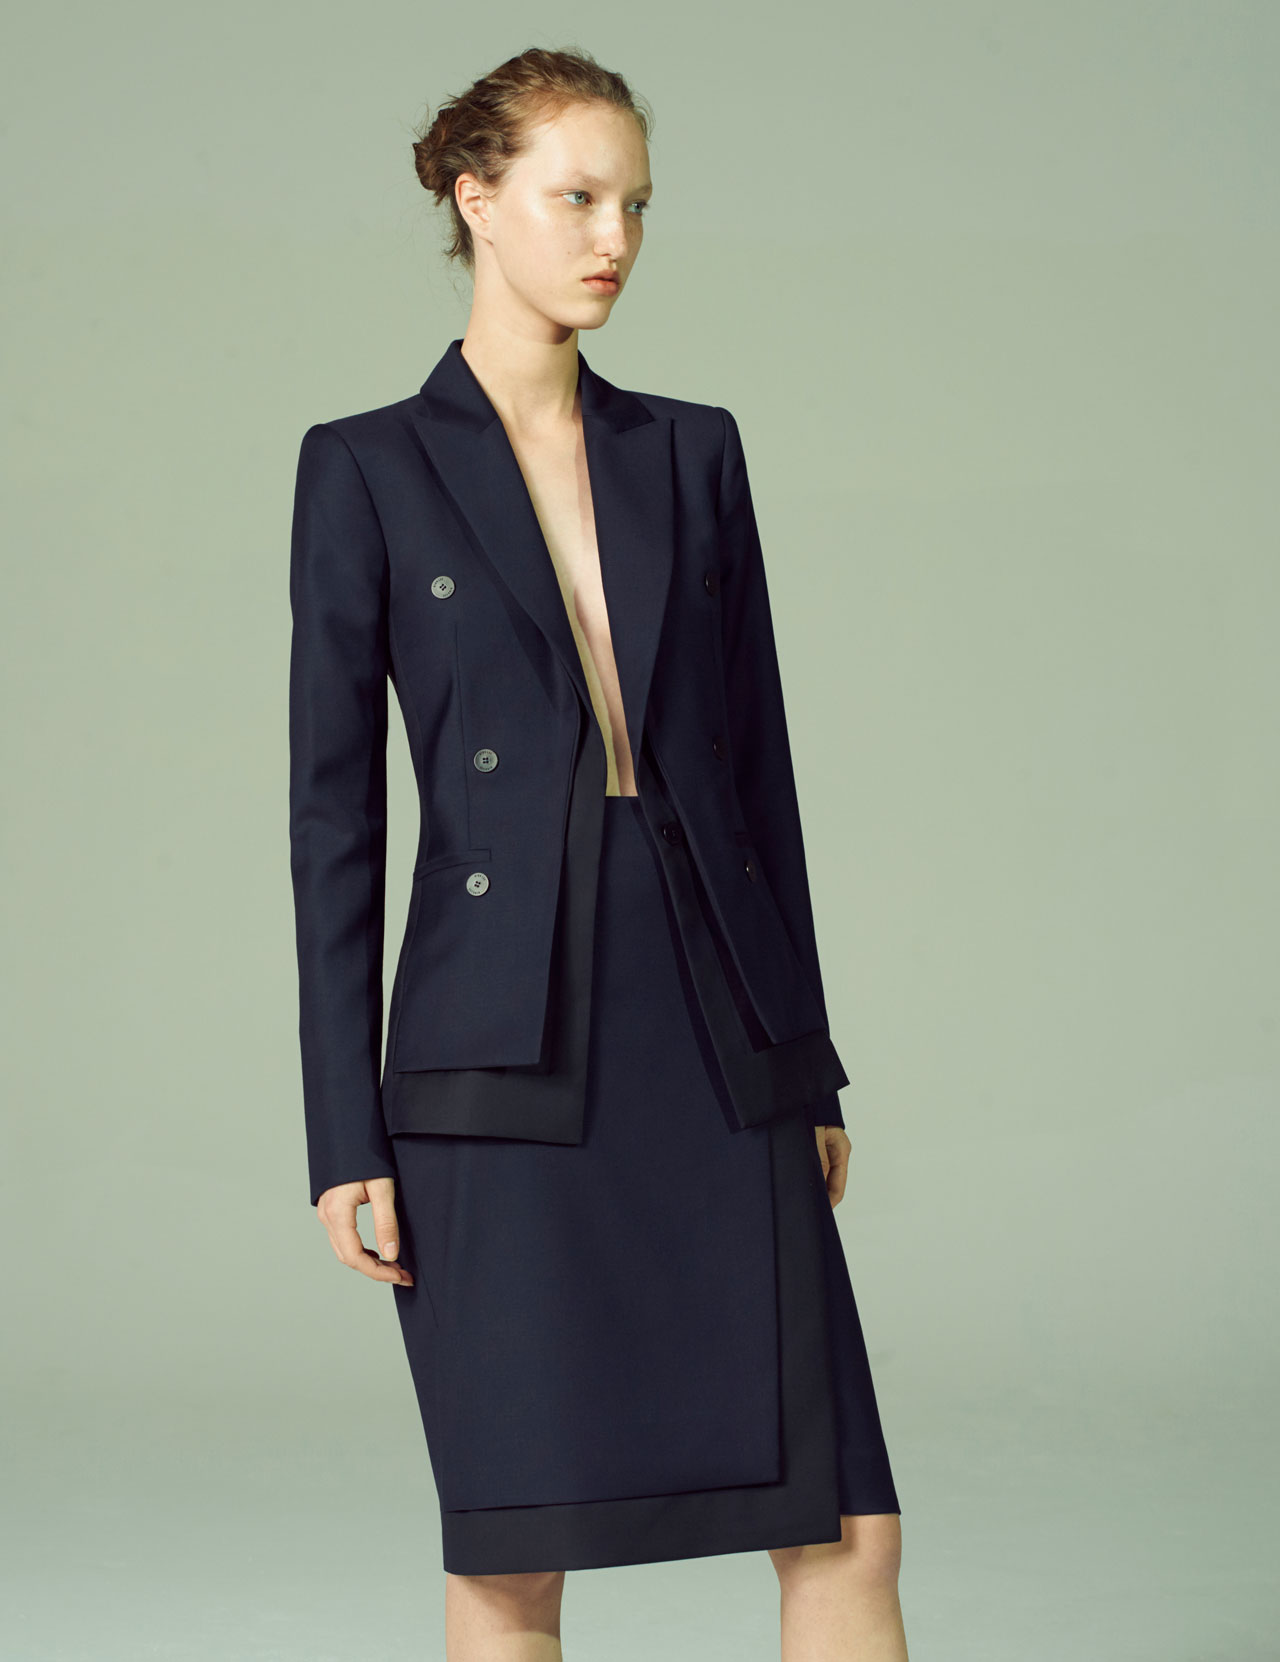 Dion Lee has launched a new woollen suit range for professional women ...